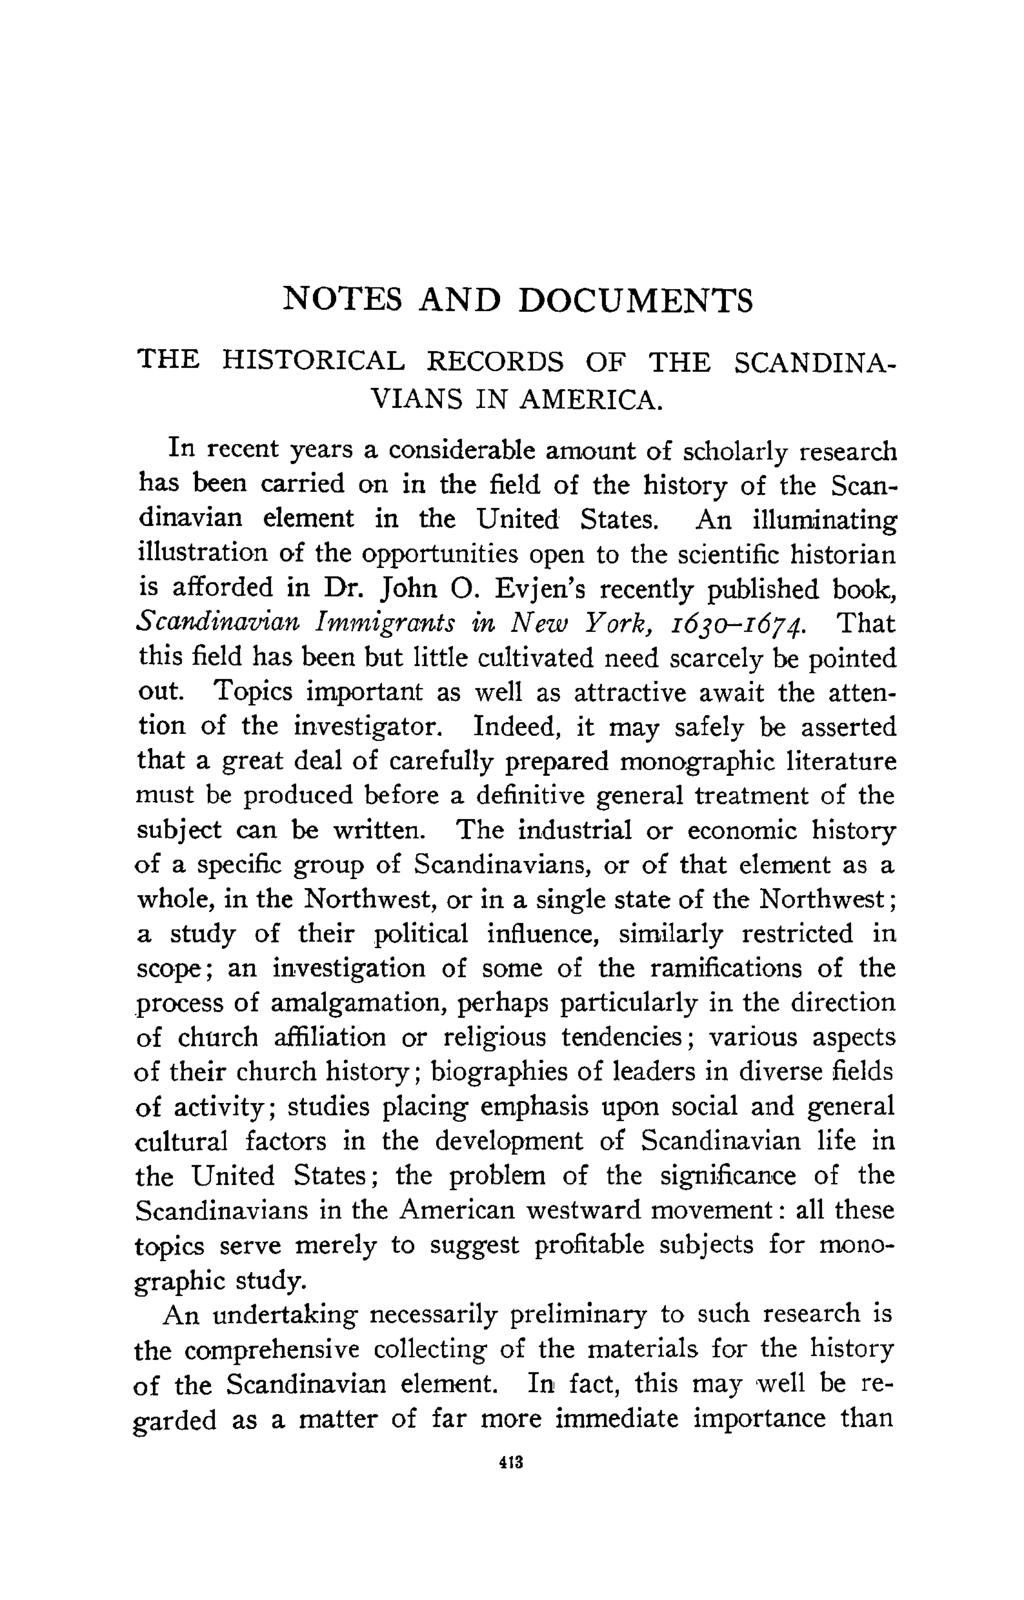 NOTES AND DOCUMENTS THE HISTORICAL RECORDS OF THE SCANDINA VIANS IN AMERICA.